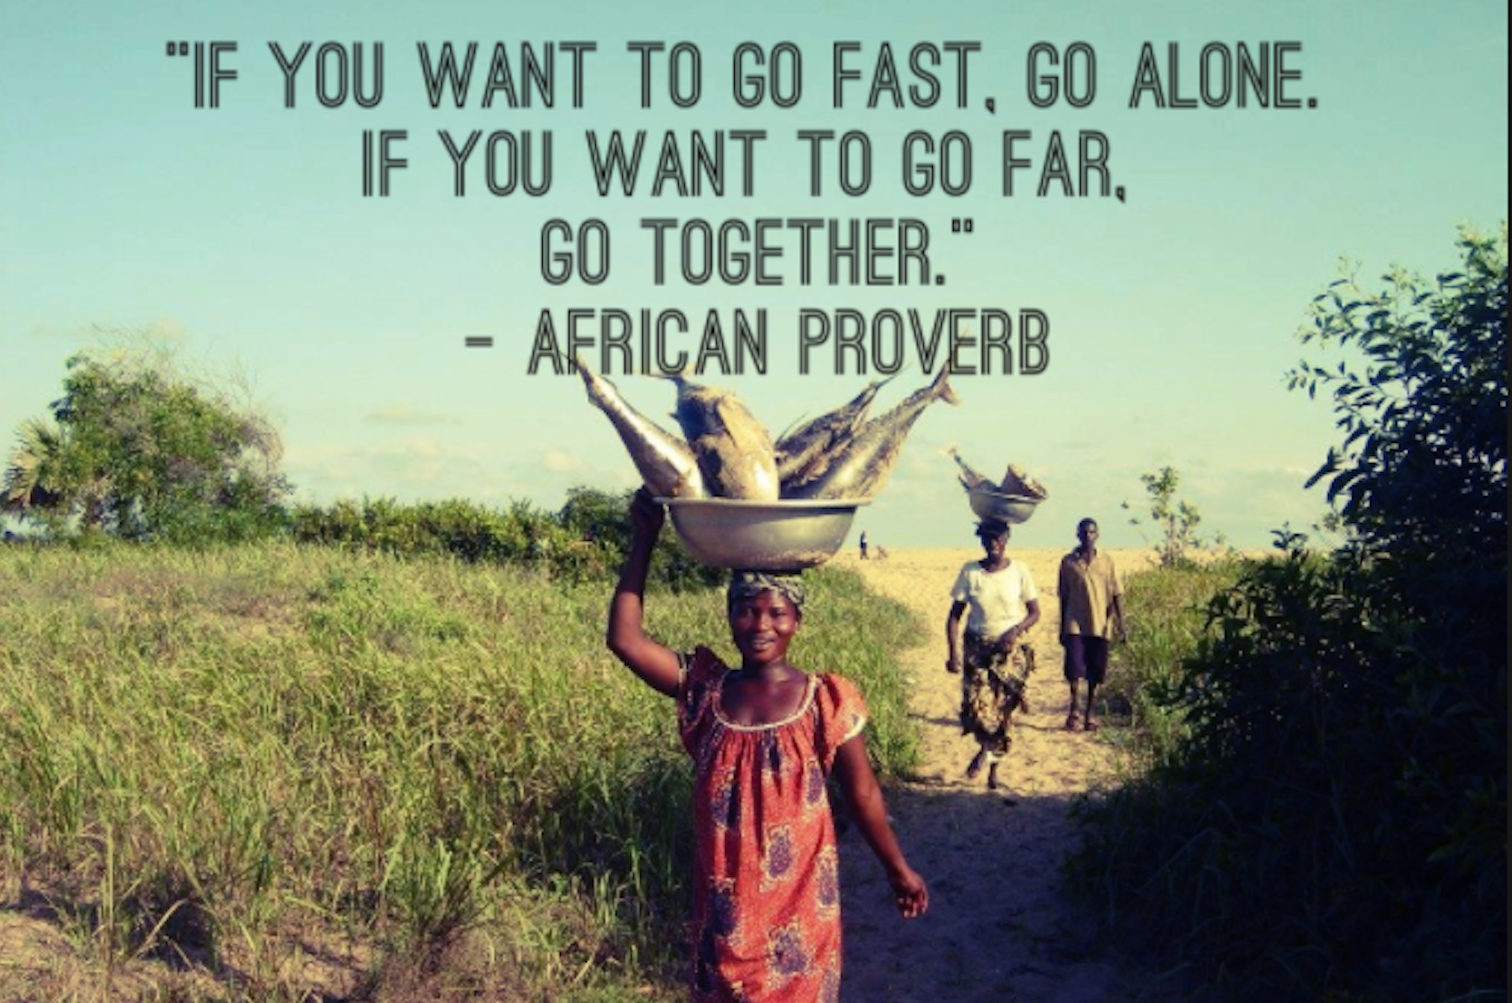 African Proverbs. Go far. If you want to go fast go Alone. Африканские пословицы.